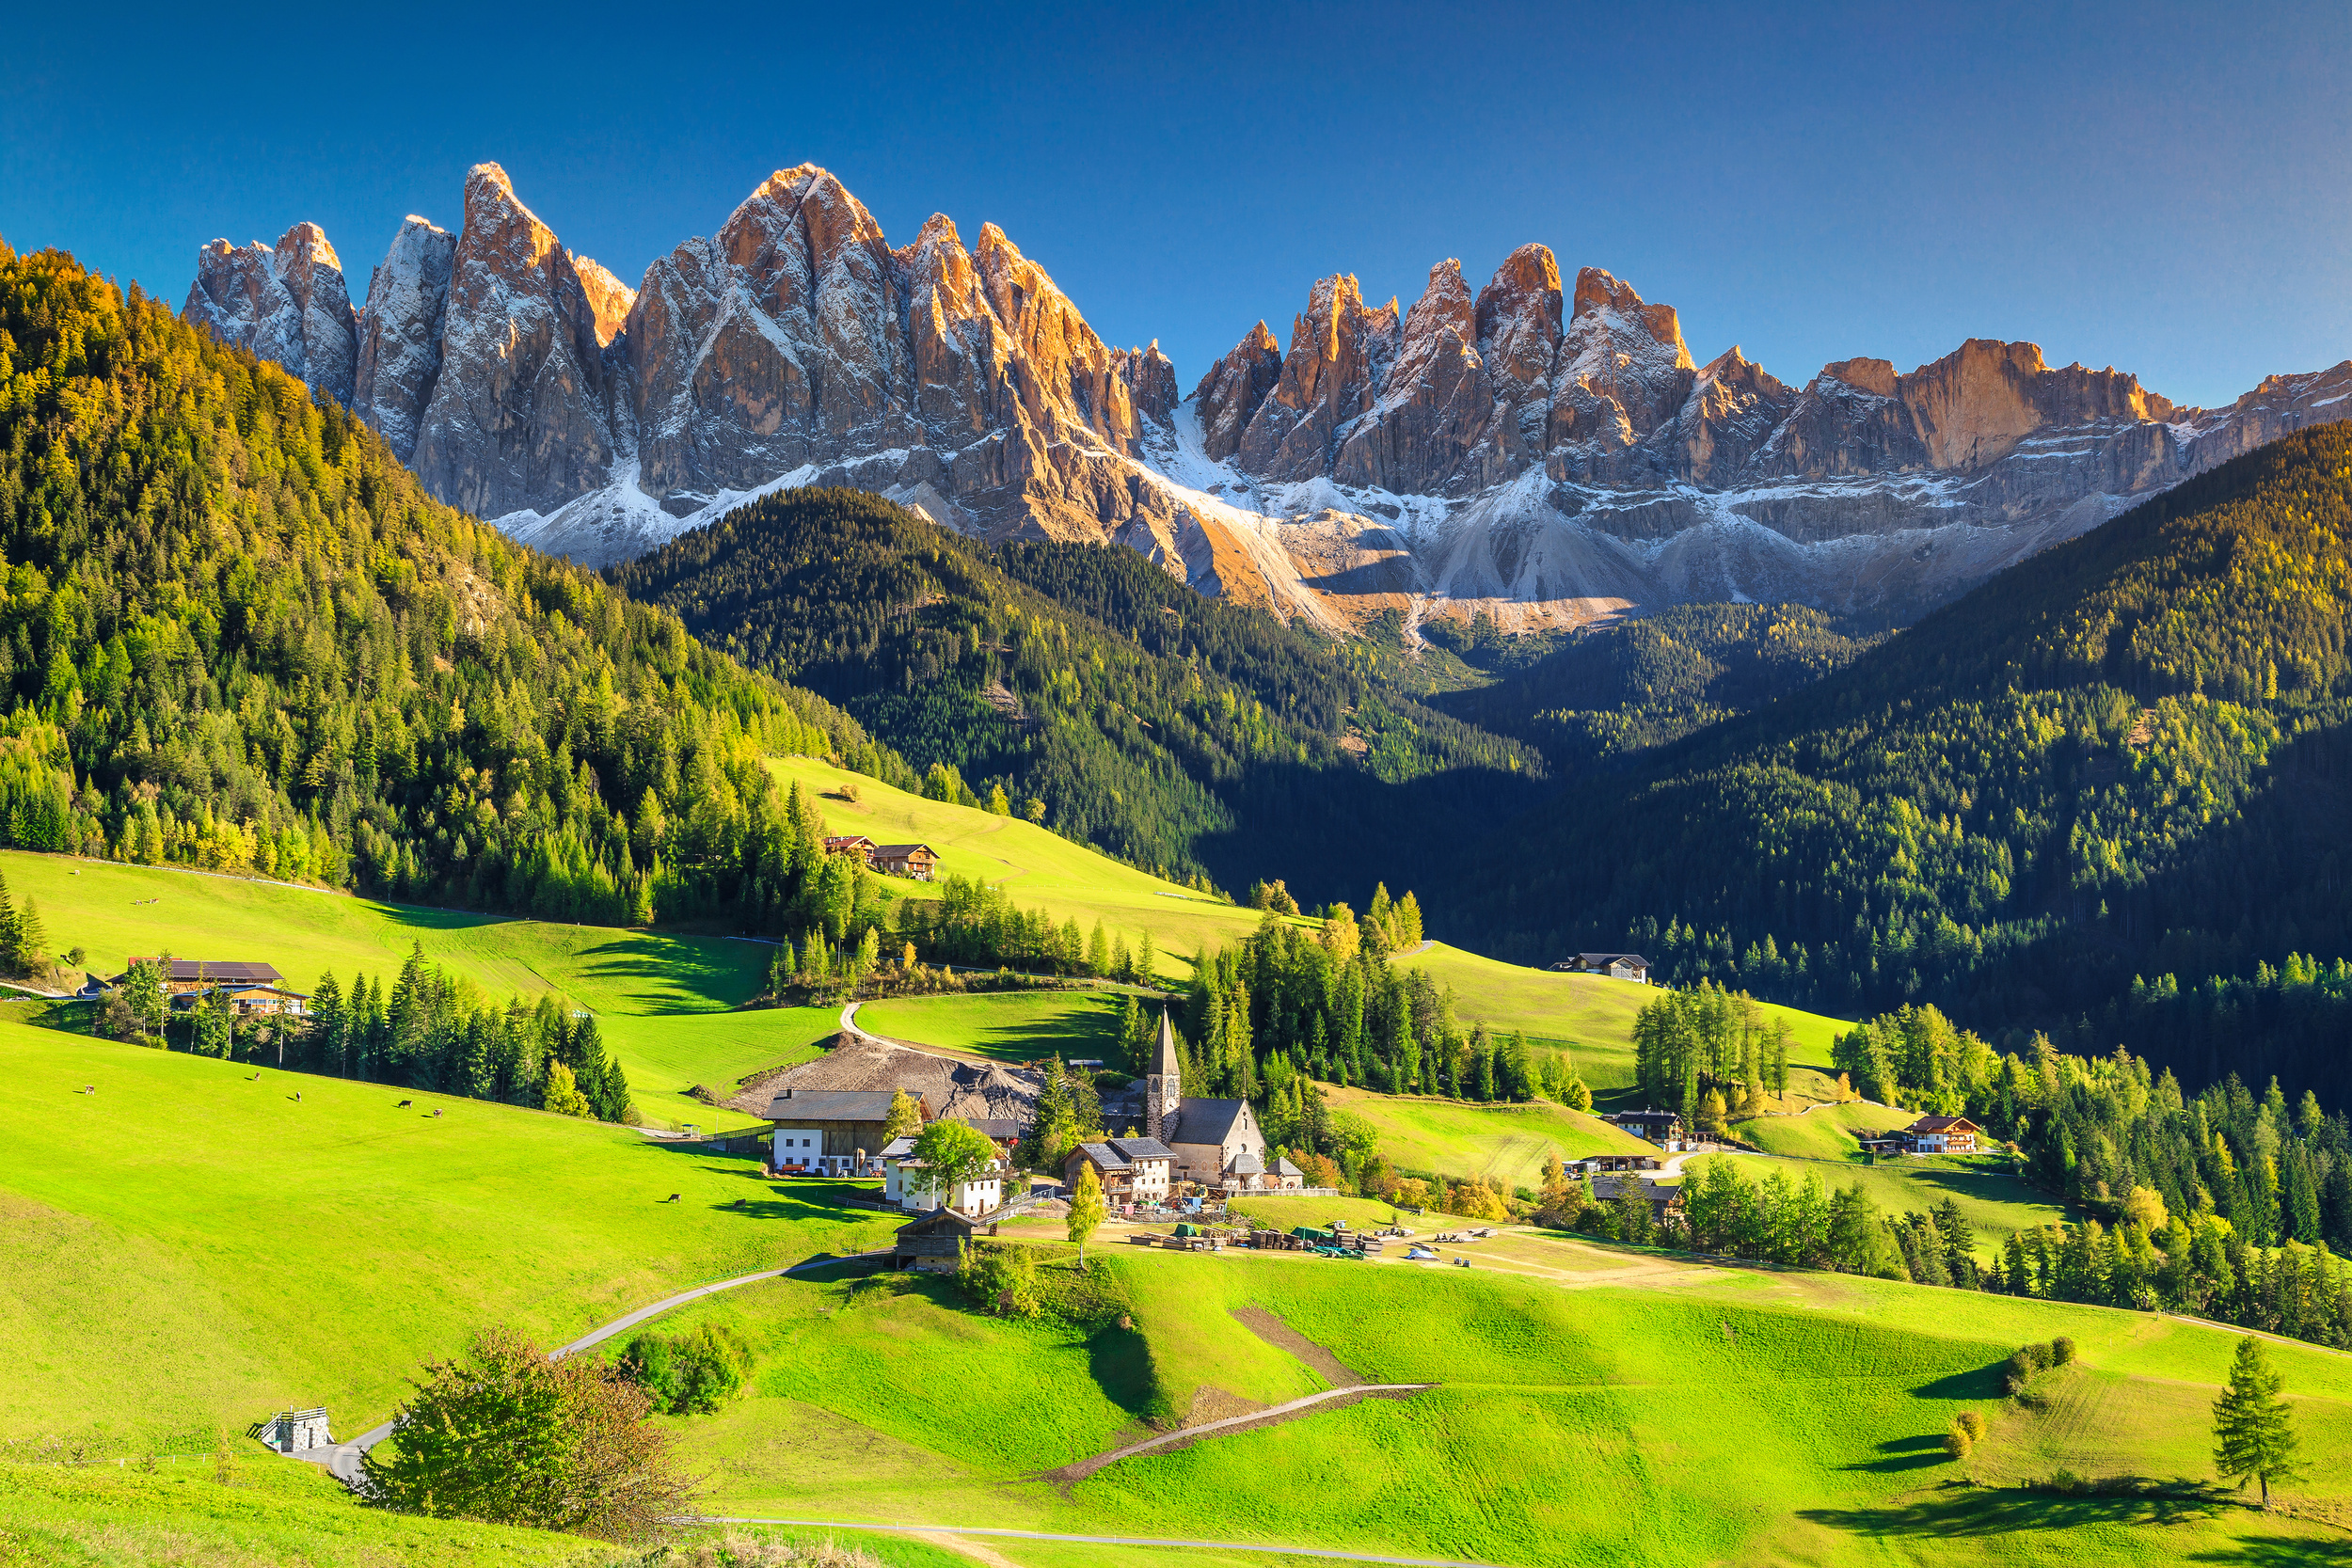 <p>Start in Milan and hit up all the major lakes in northern Italy, from glamorous Lake Como to less pretentious but still lovely Lake Garda and Lake Maggiore, plus plenty of other small ones. You’ll delight in the Italian mountain scenery!</p><p>You may also like: <a href='https://www.yardbarker.com/lifestyle/articles/23_foods_that_make_us_nostalgic_for_the_90s_022524/s1__39034591'>23 foods that make us nostalgic for the ‘90s</a></p>